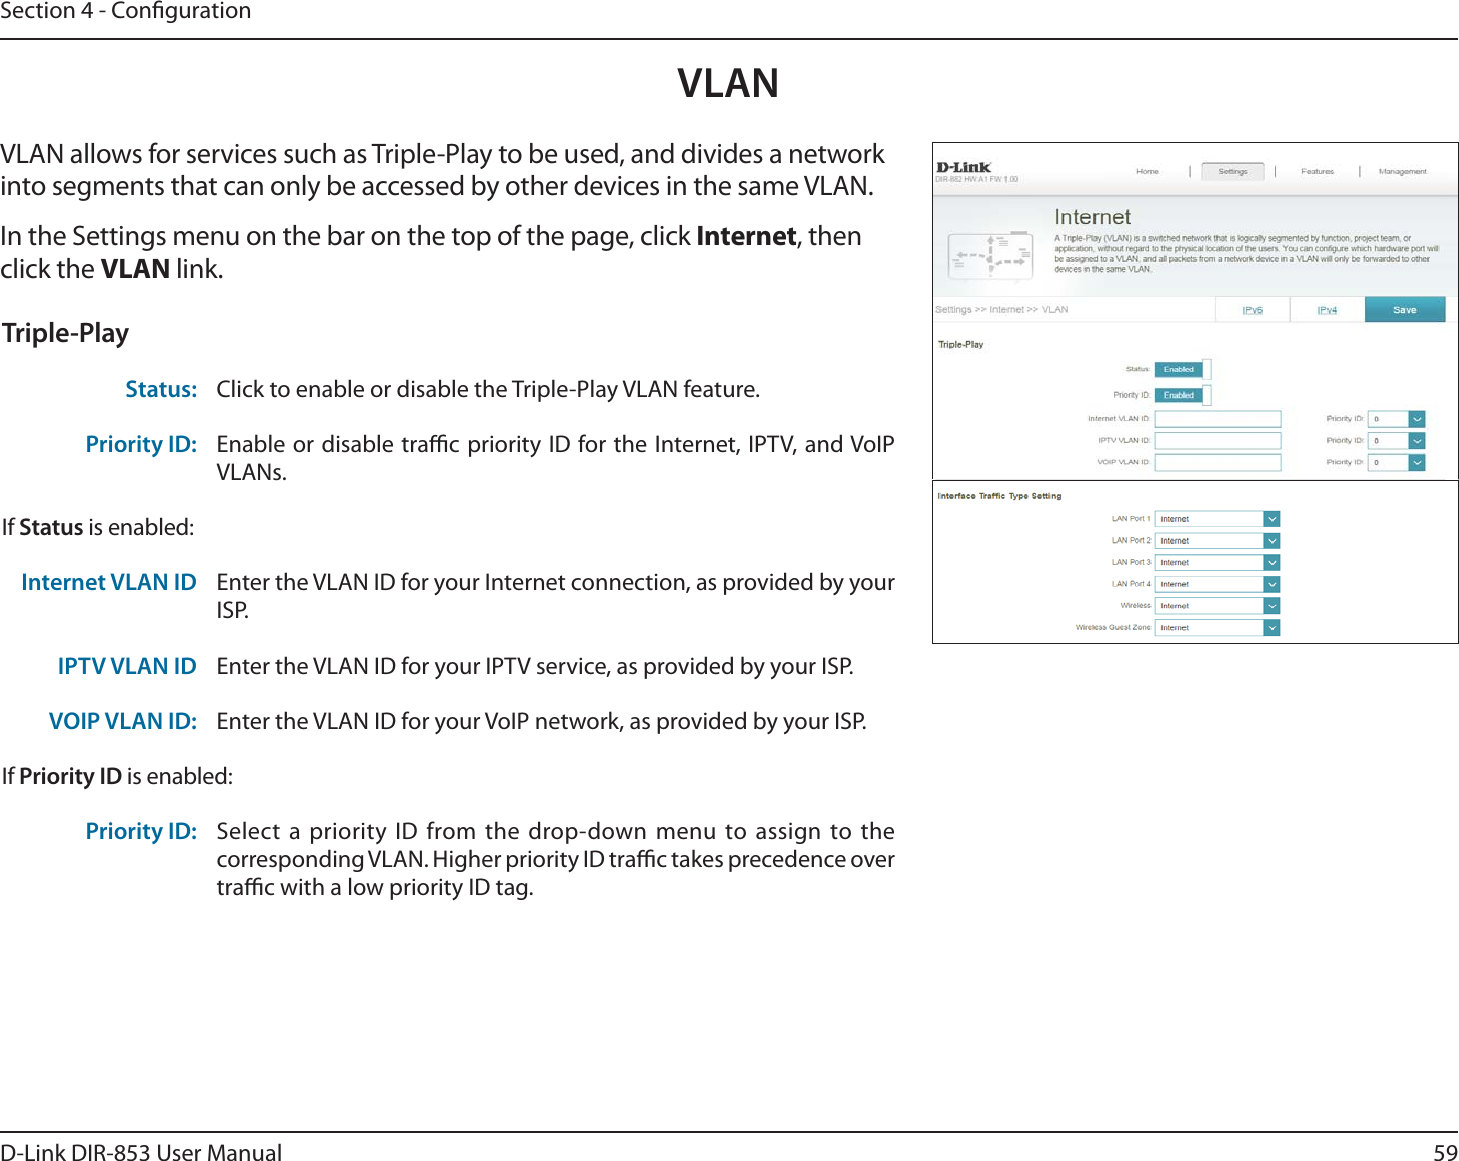 59D-Link DIR-853 User ManualSection 4 - CongurationVLANVLAN allows for services such as Triple-Play to be used, and divides a network into segments that can only be accessed by other devices in the same VLAN.In the Settings menu on the bar on the top of the page, click Internet, then click the VLAN link. Triple-PlayStatus: Click to enable or disable the Triple-Play VLAN feature. Priority ID: Enable or disable trac priority ID for the Internet, IPTV, and VoIP VLANs. If Status is enabled:Internet VLAN ID Enter the VLAN ID for your Internet connection, as provided by your ISP.IPTV VLAN ID Enter the VLAN ID for your IPTV service, as provided by your ISP. VOIP VLAN ID: Enter the VLAN ID for your VoIP network, as provided by your ISP. If Priority ID is enabled:Priority ID: Select a priority ID from the drop-down menu to assign to the corresponding VLAN. Higher priority ID trac takes precedence over trac with a low priority ID tag.